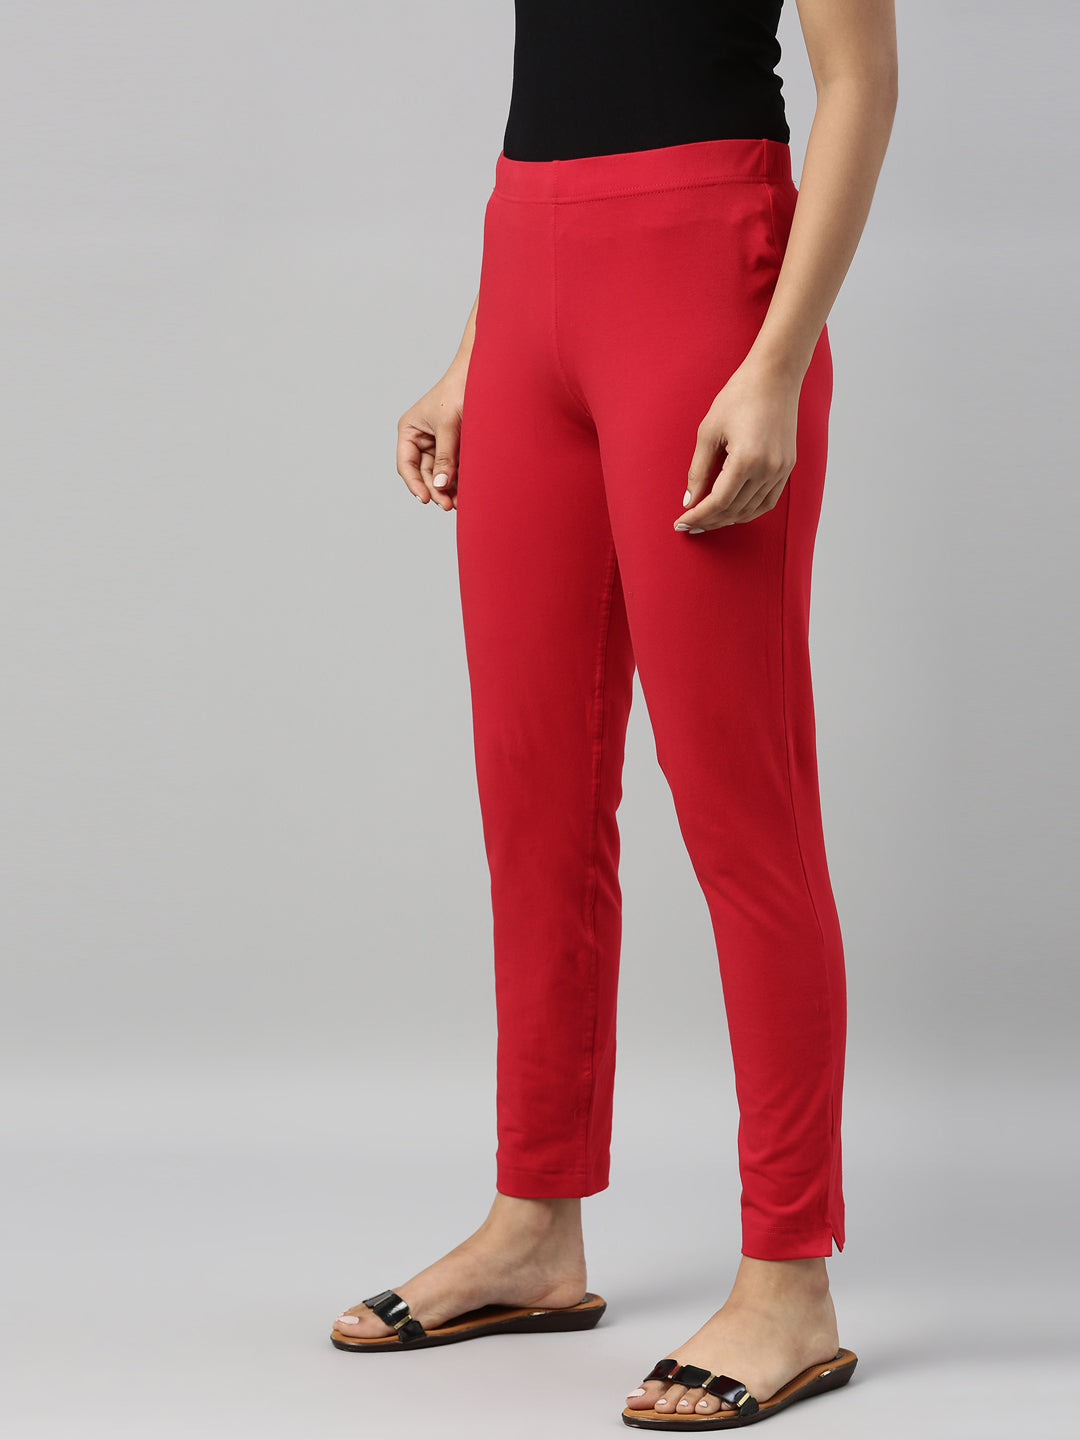 Go Colors  Buy Women Bottom Wears from Go Colors Online in India